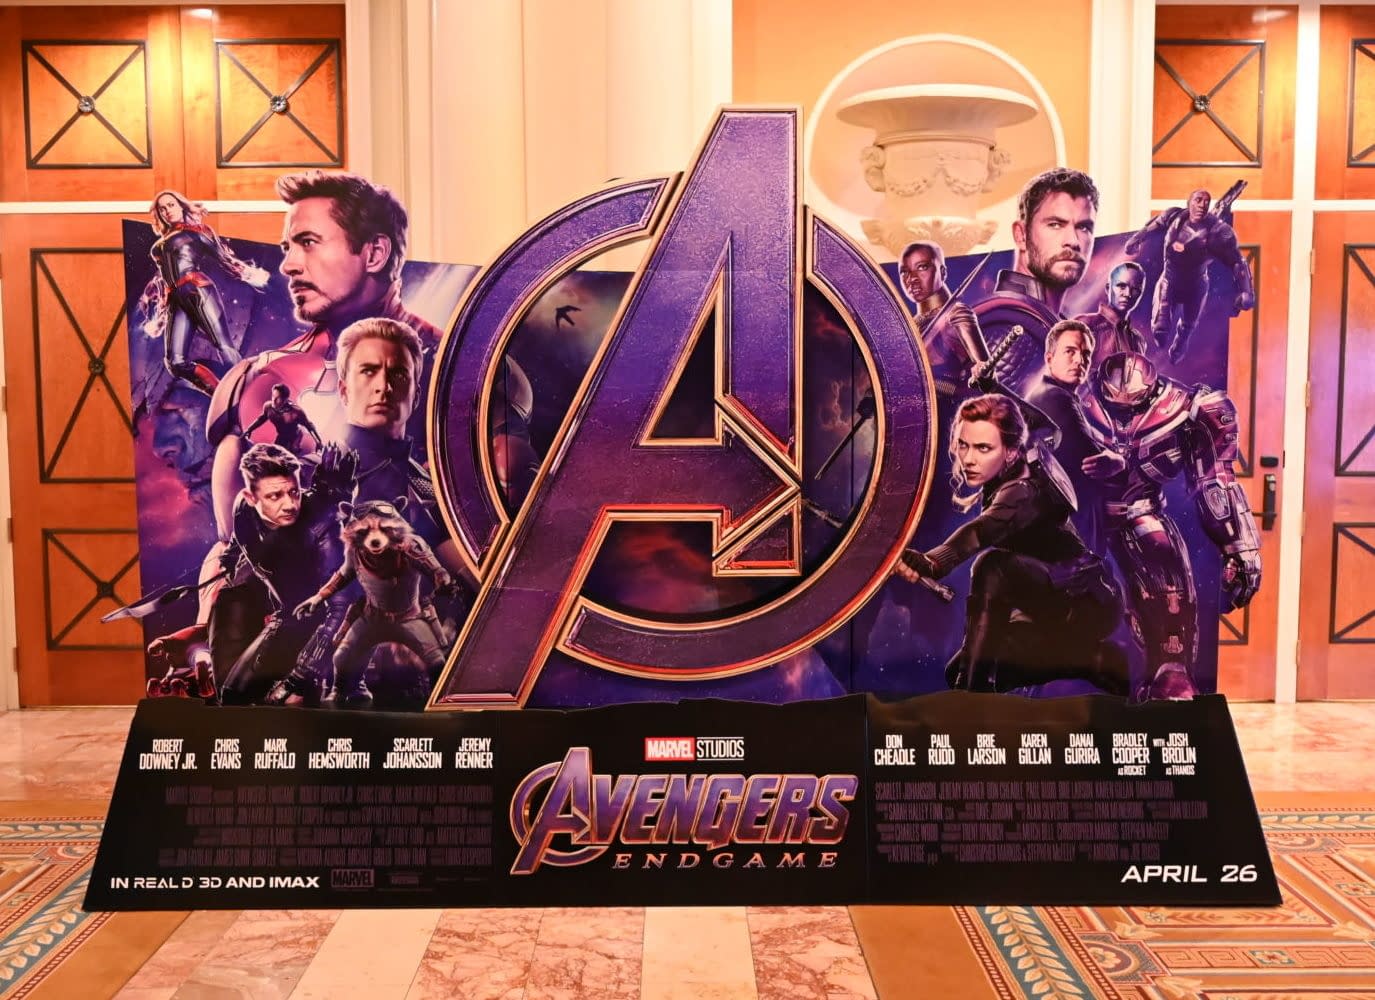 [CinemaCon 2019] Prepare to Avenge the Fallen with This Avengers: Endgame Standee